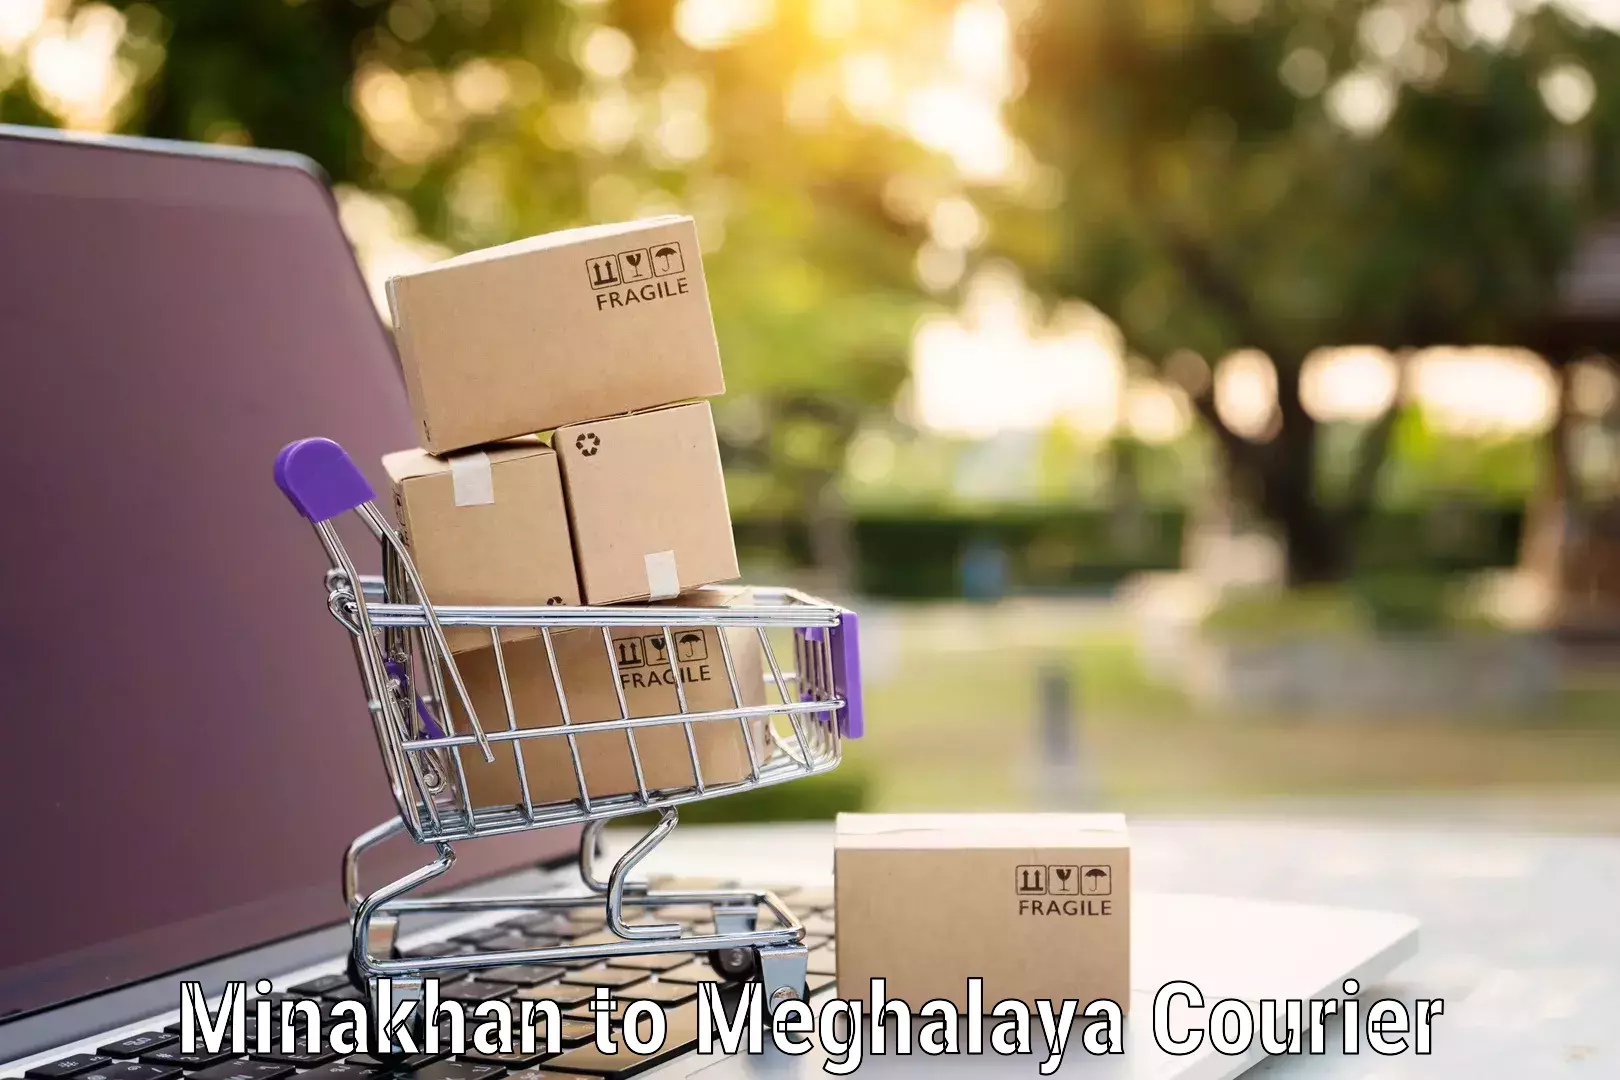 Furniture moving specialists Minakhan to Meghalaya